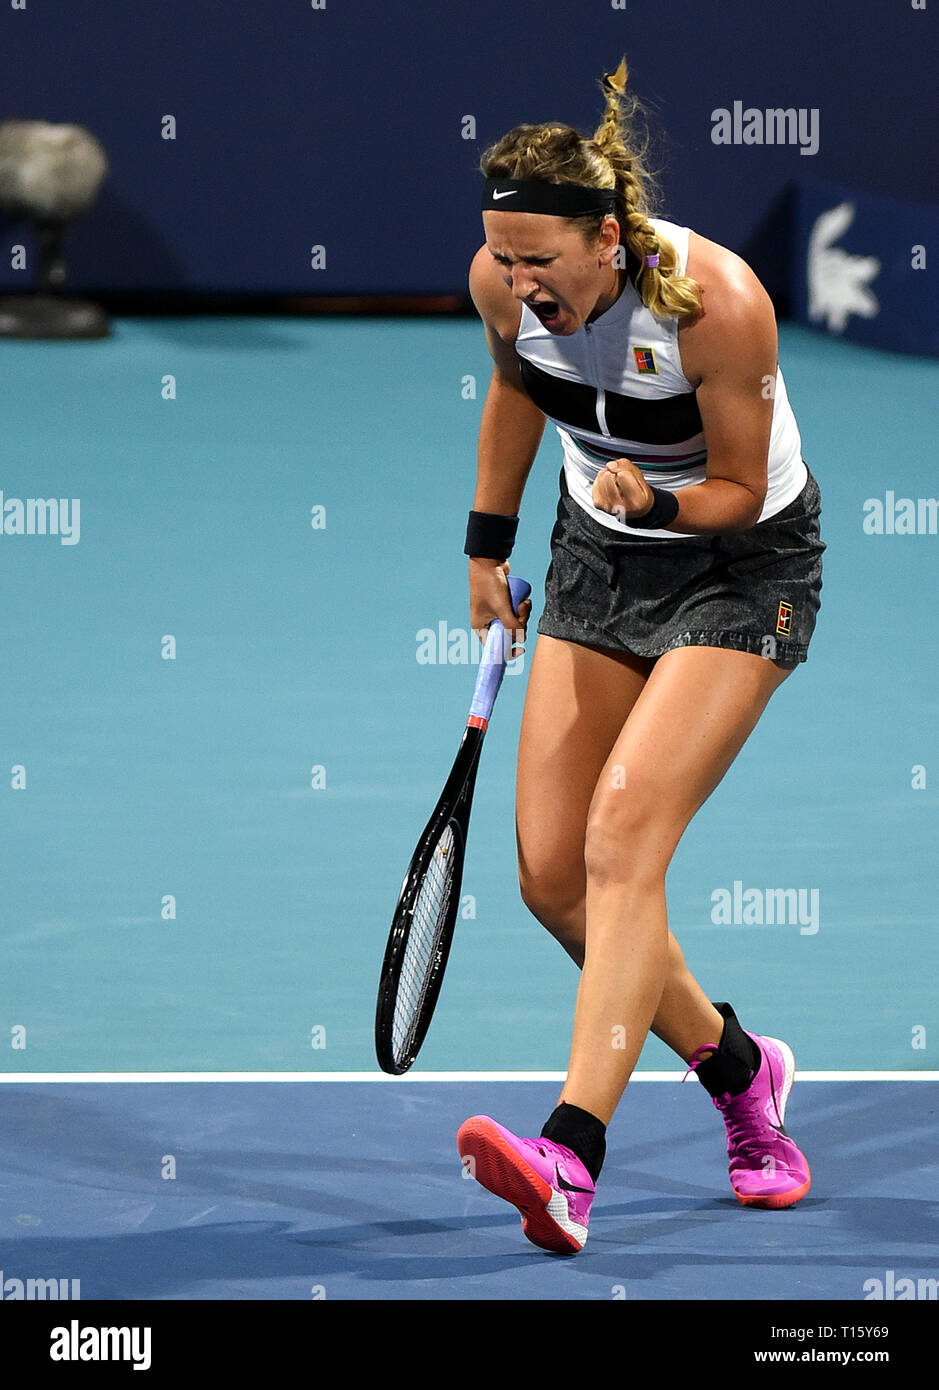 Miami, USA. 21st Mar, 2019.  Victoria Azarenka of Belarus reacts after winning a point against Caroline Garcia of France at the Hard Rock Stadium at the Miami Open on March 21, 2019 in Miami Gardens, Florida. Garcia beat Azarenka 6-3, 6-4. (Paul Hennessy/Alamy) Credit: Paul Hennessy/Alamy Live News Stock Photo